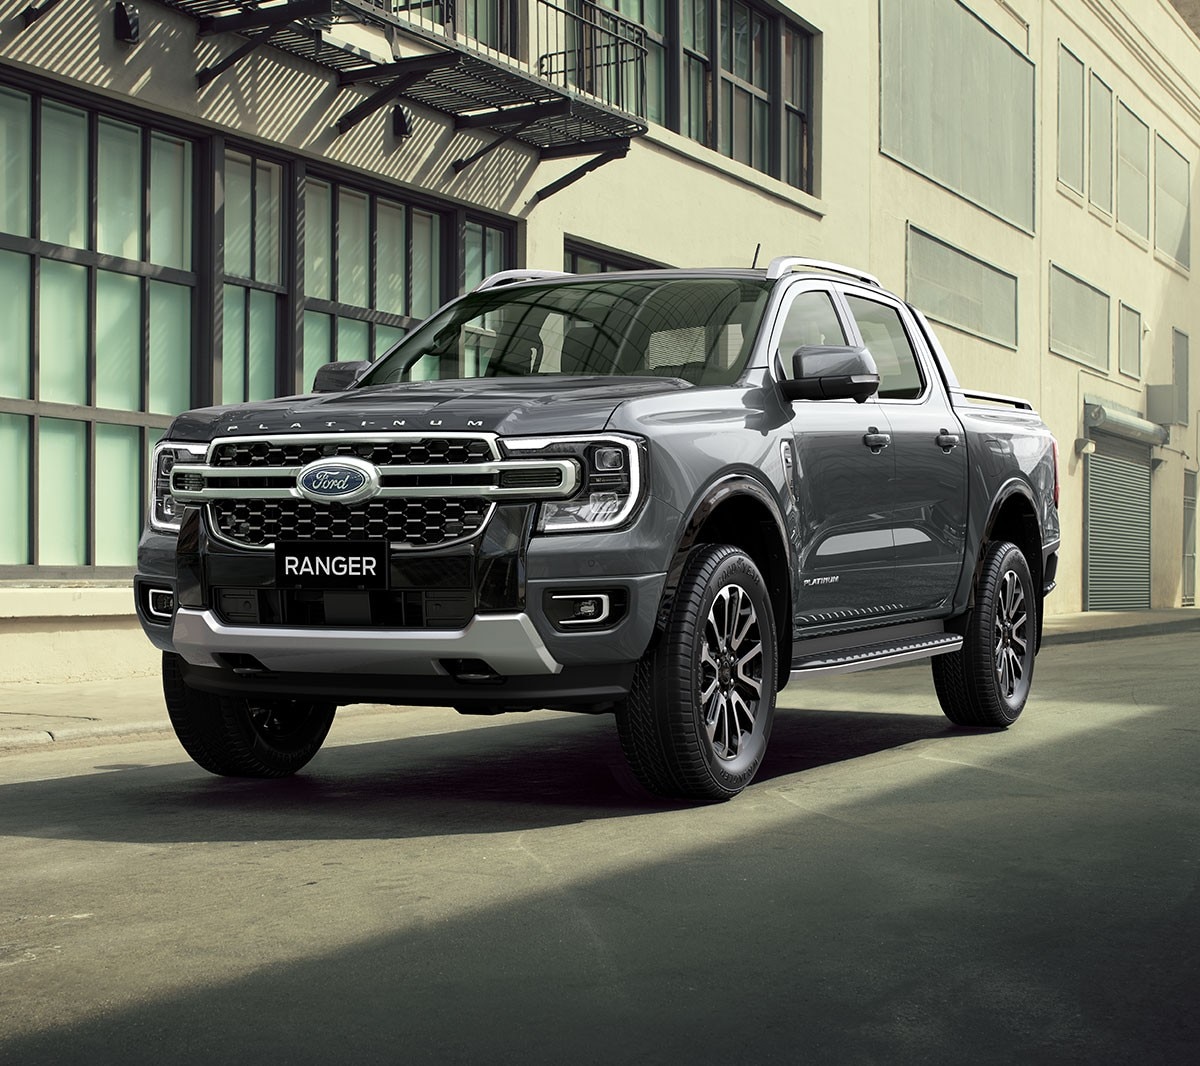 All-New Ford Ranger Platinum front 3/4 view